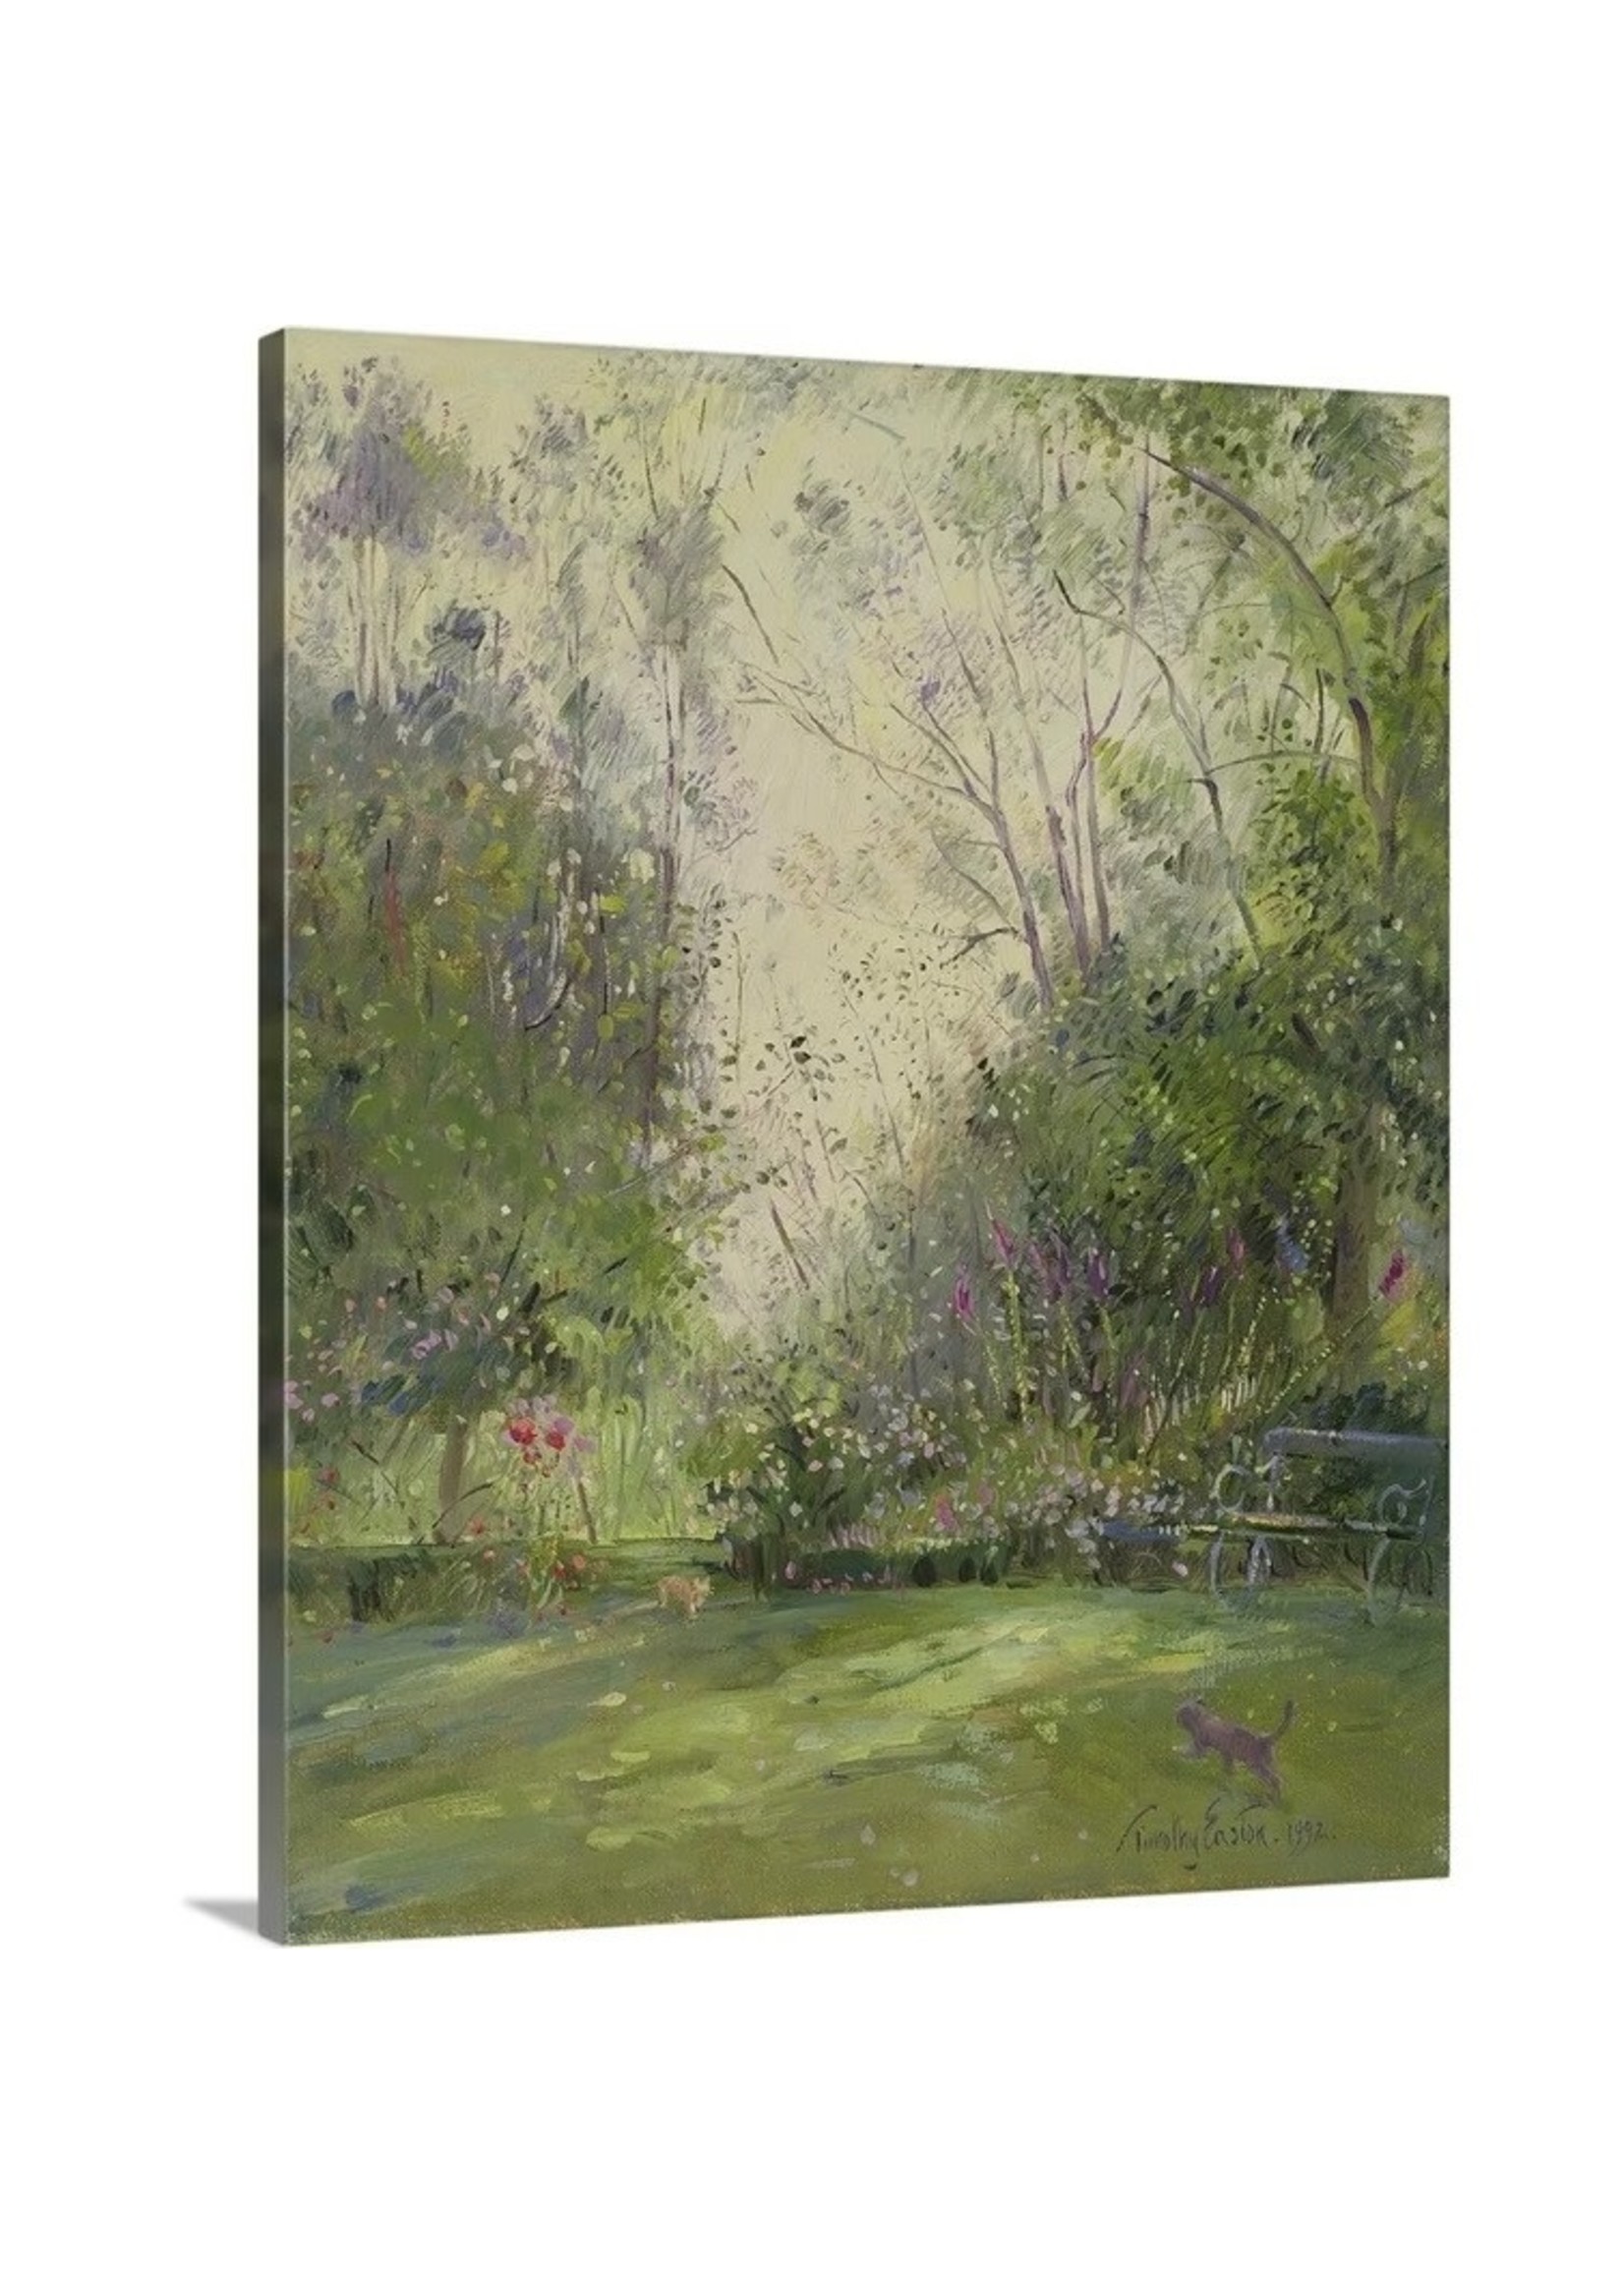 *45"x36"The Edge of the Wood by Timothy Easton - on Canvas